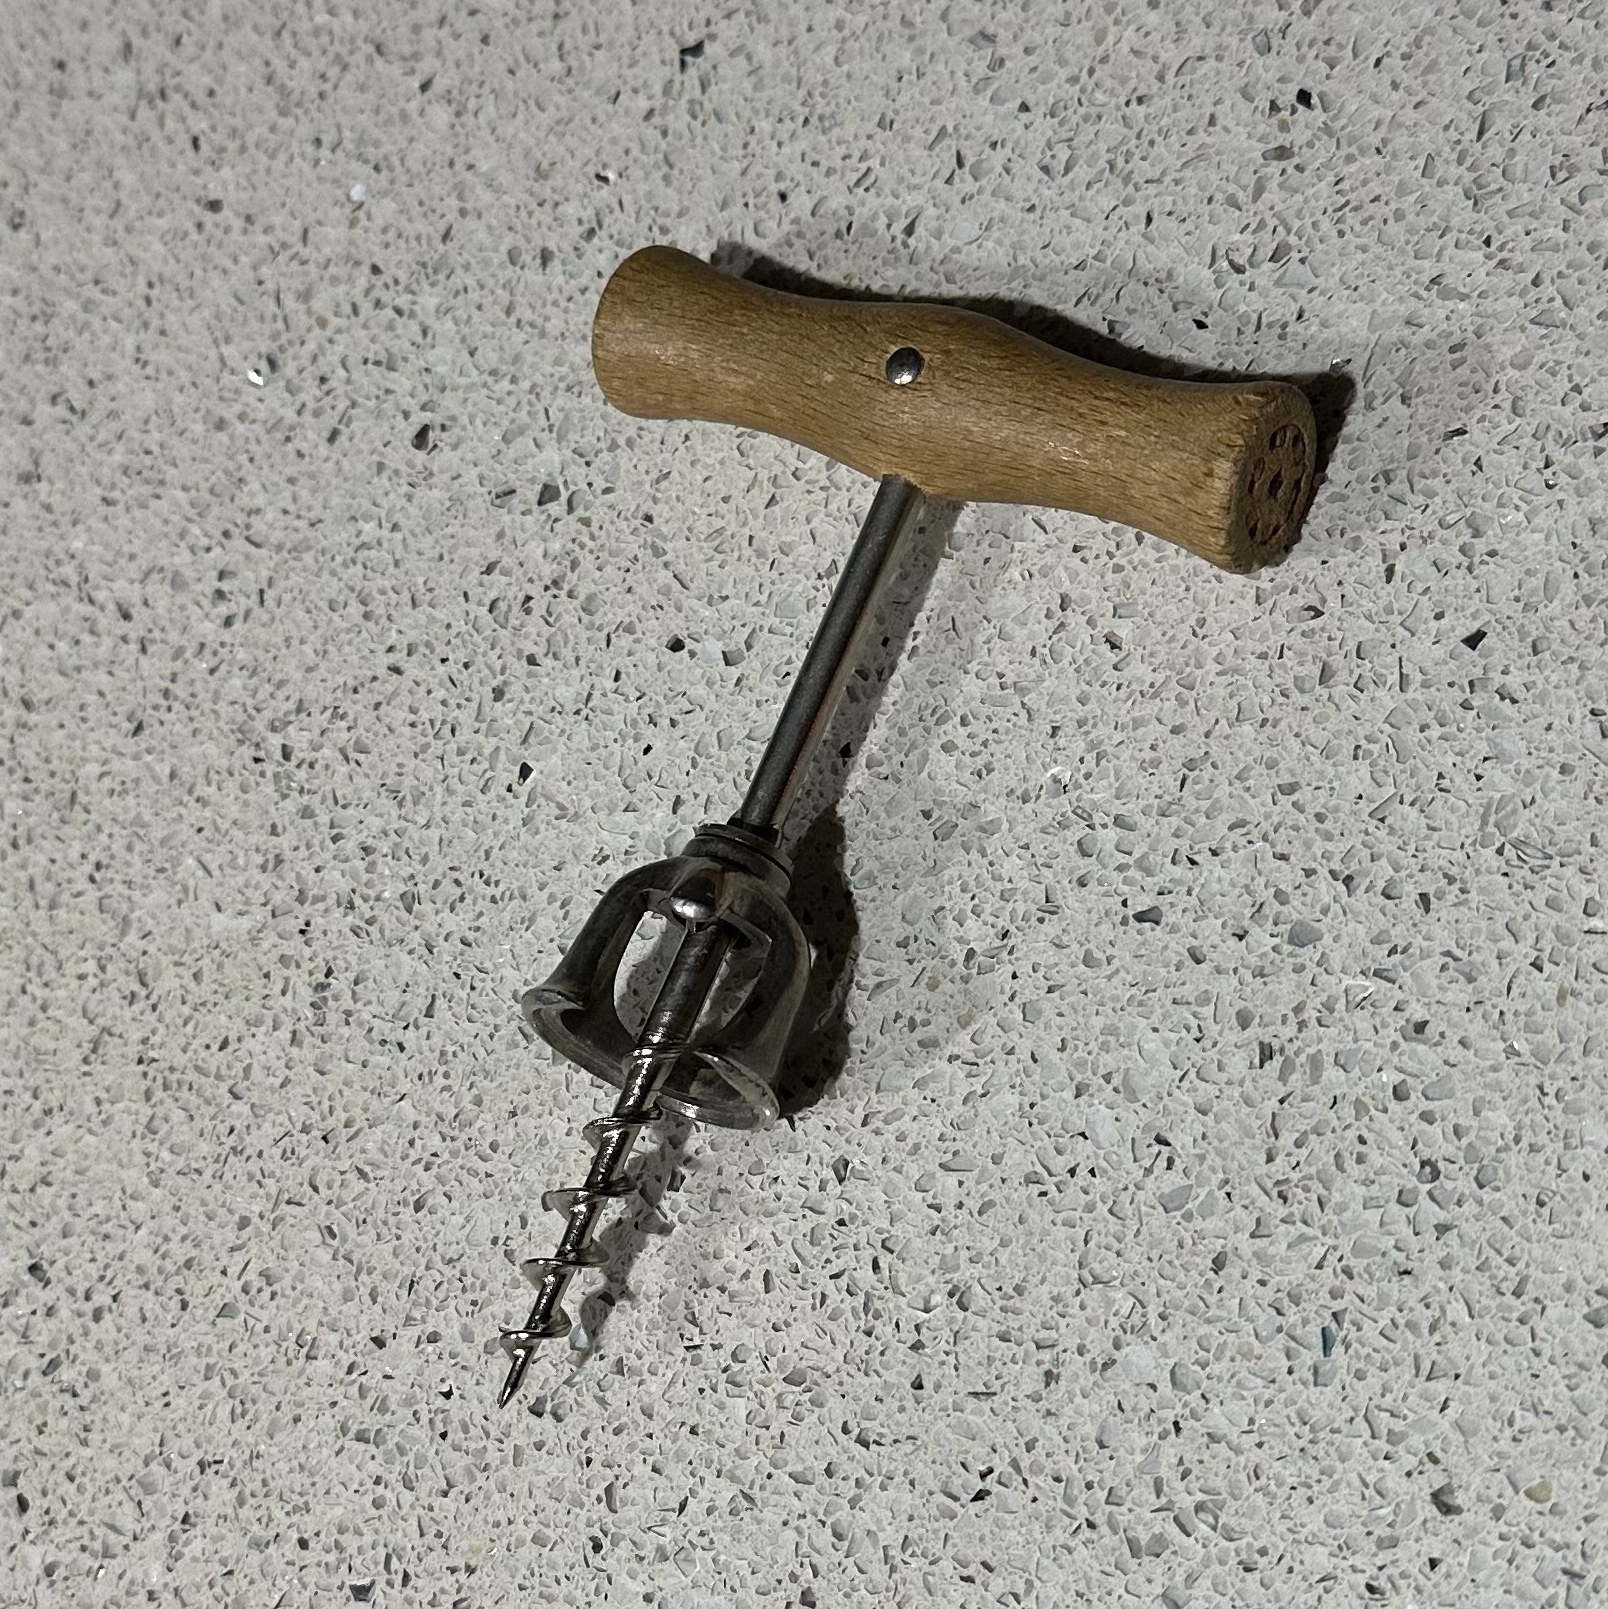 A metal corkscrew with a simple wooden handle and a bell shape stopper about two thirds of the way along to pull the cork up into.